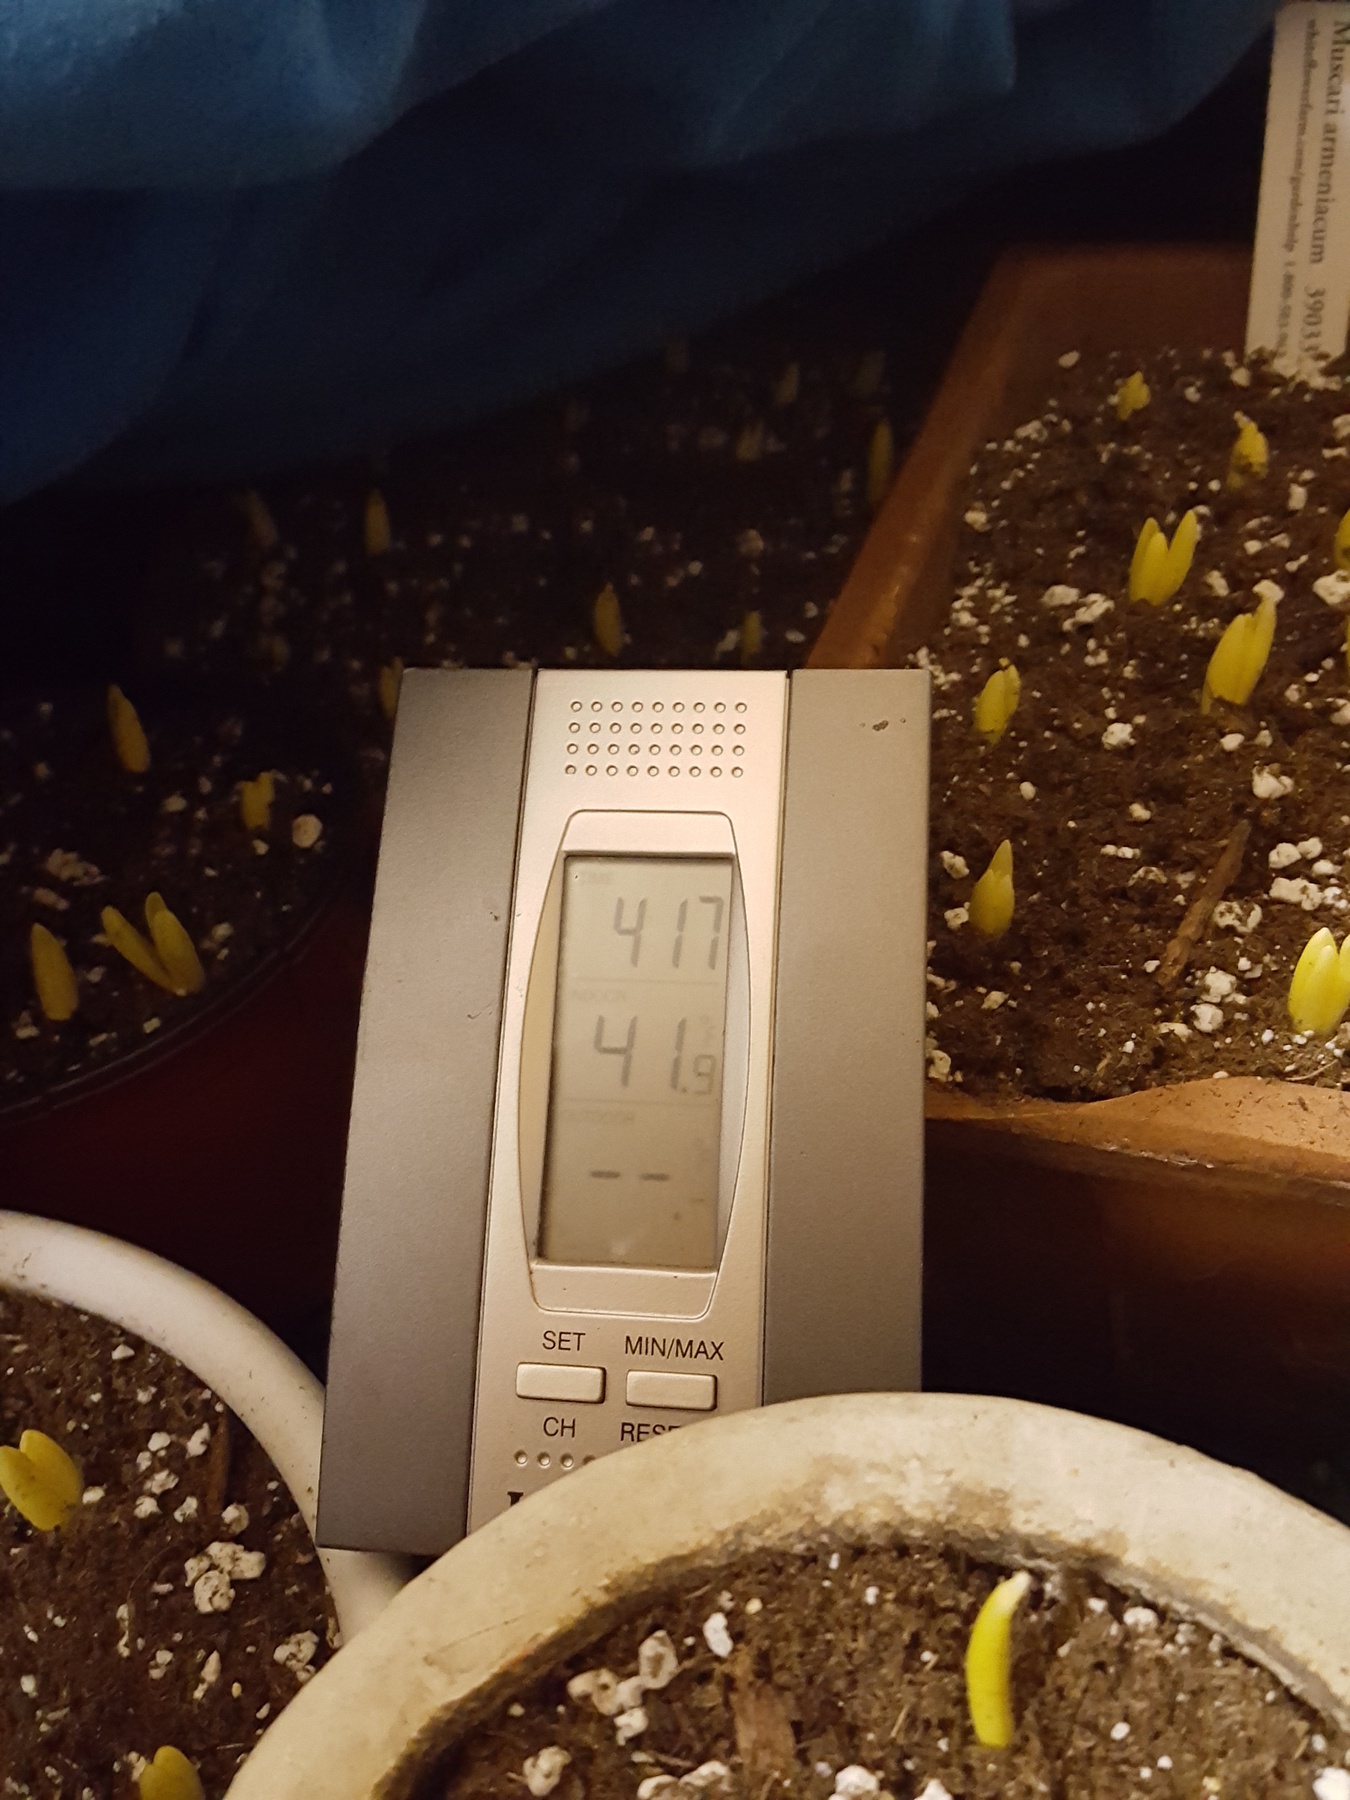 a-thermometer-placed-in-the-crate-inside-the-shed-helps-monitor-temperatures